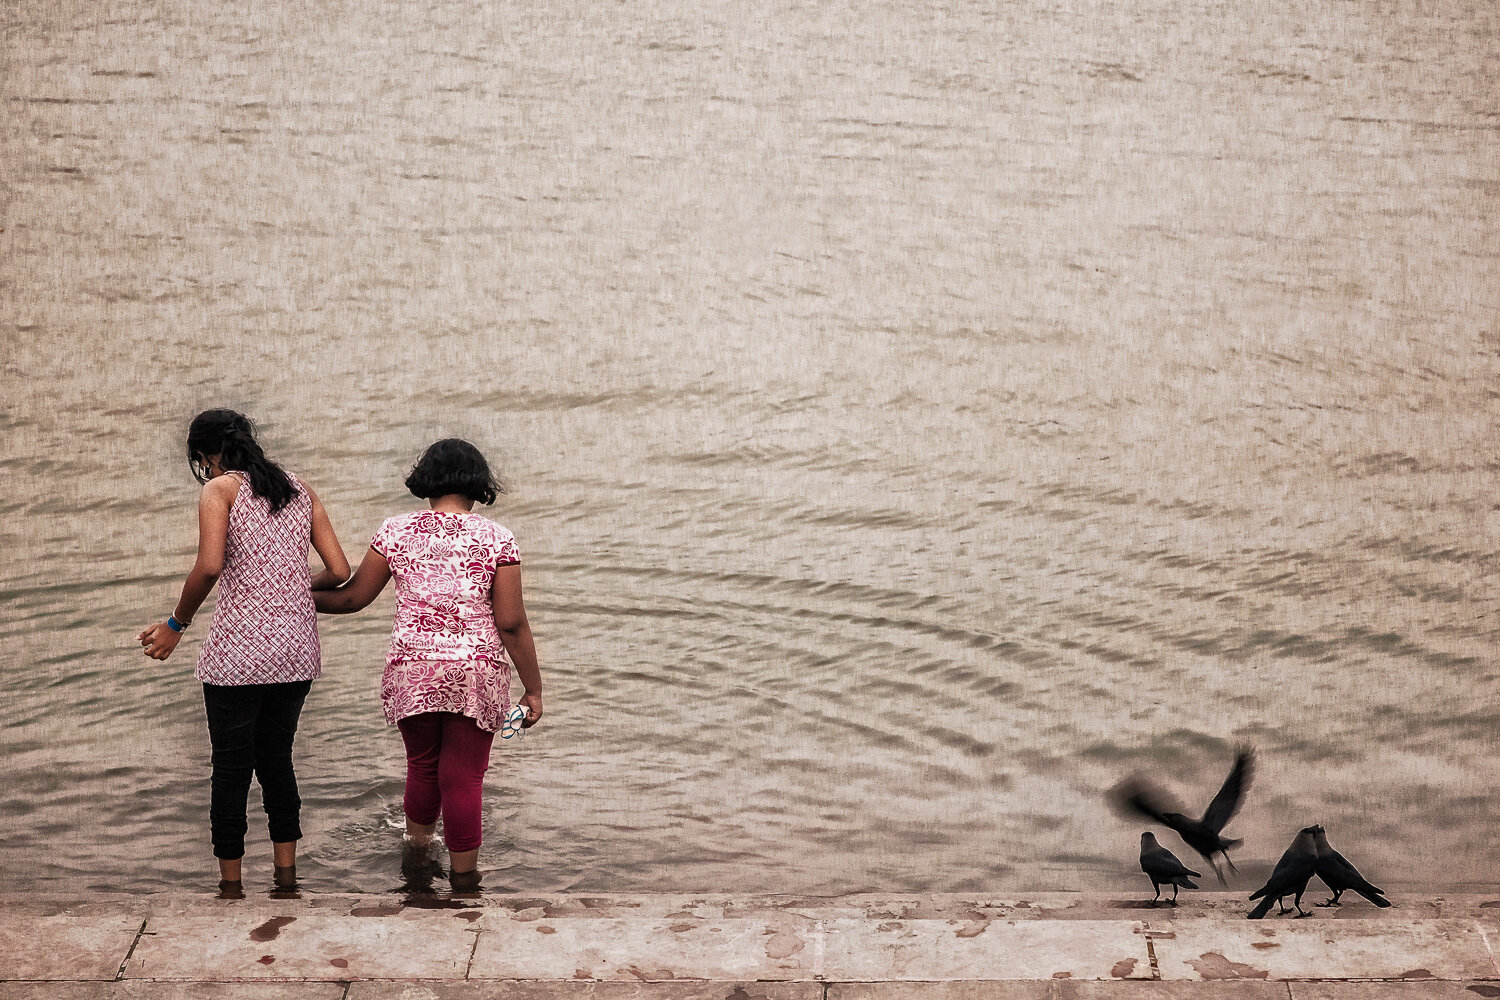 Two Girls and Crows, Hooghly River, Kolkata, India